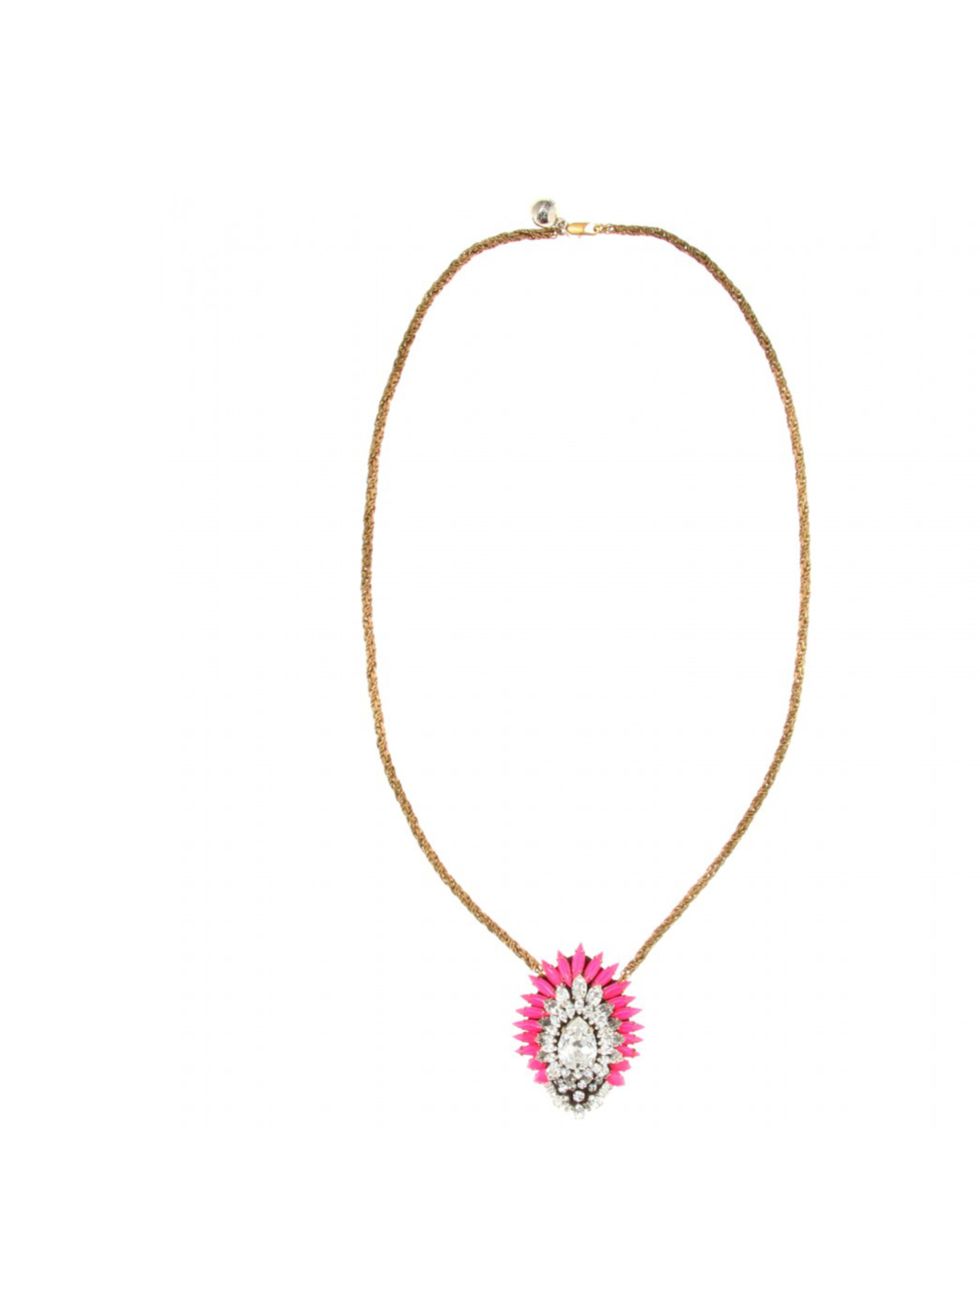 <p>Shourouk crystal embellished neon necklace, £234, at Mytheresa</p><p><a href="http://shopping.elleuk.com/browse?fts=shourouk+necklace">BUY NOW</a></p>